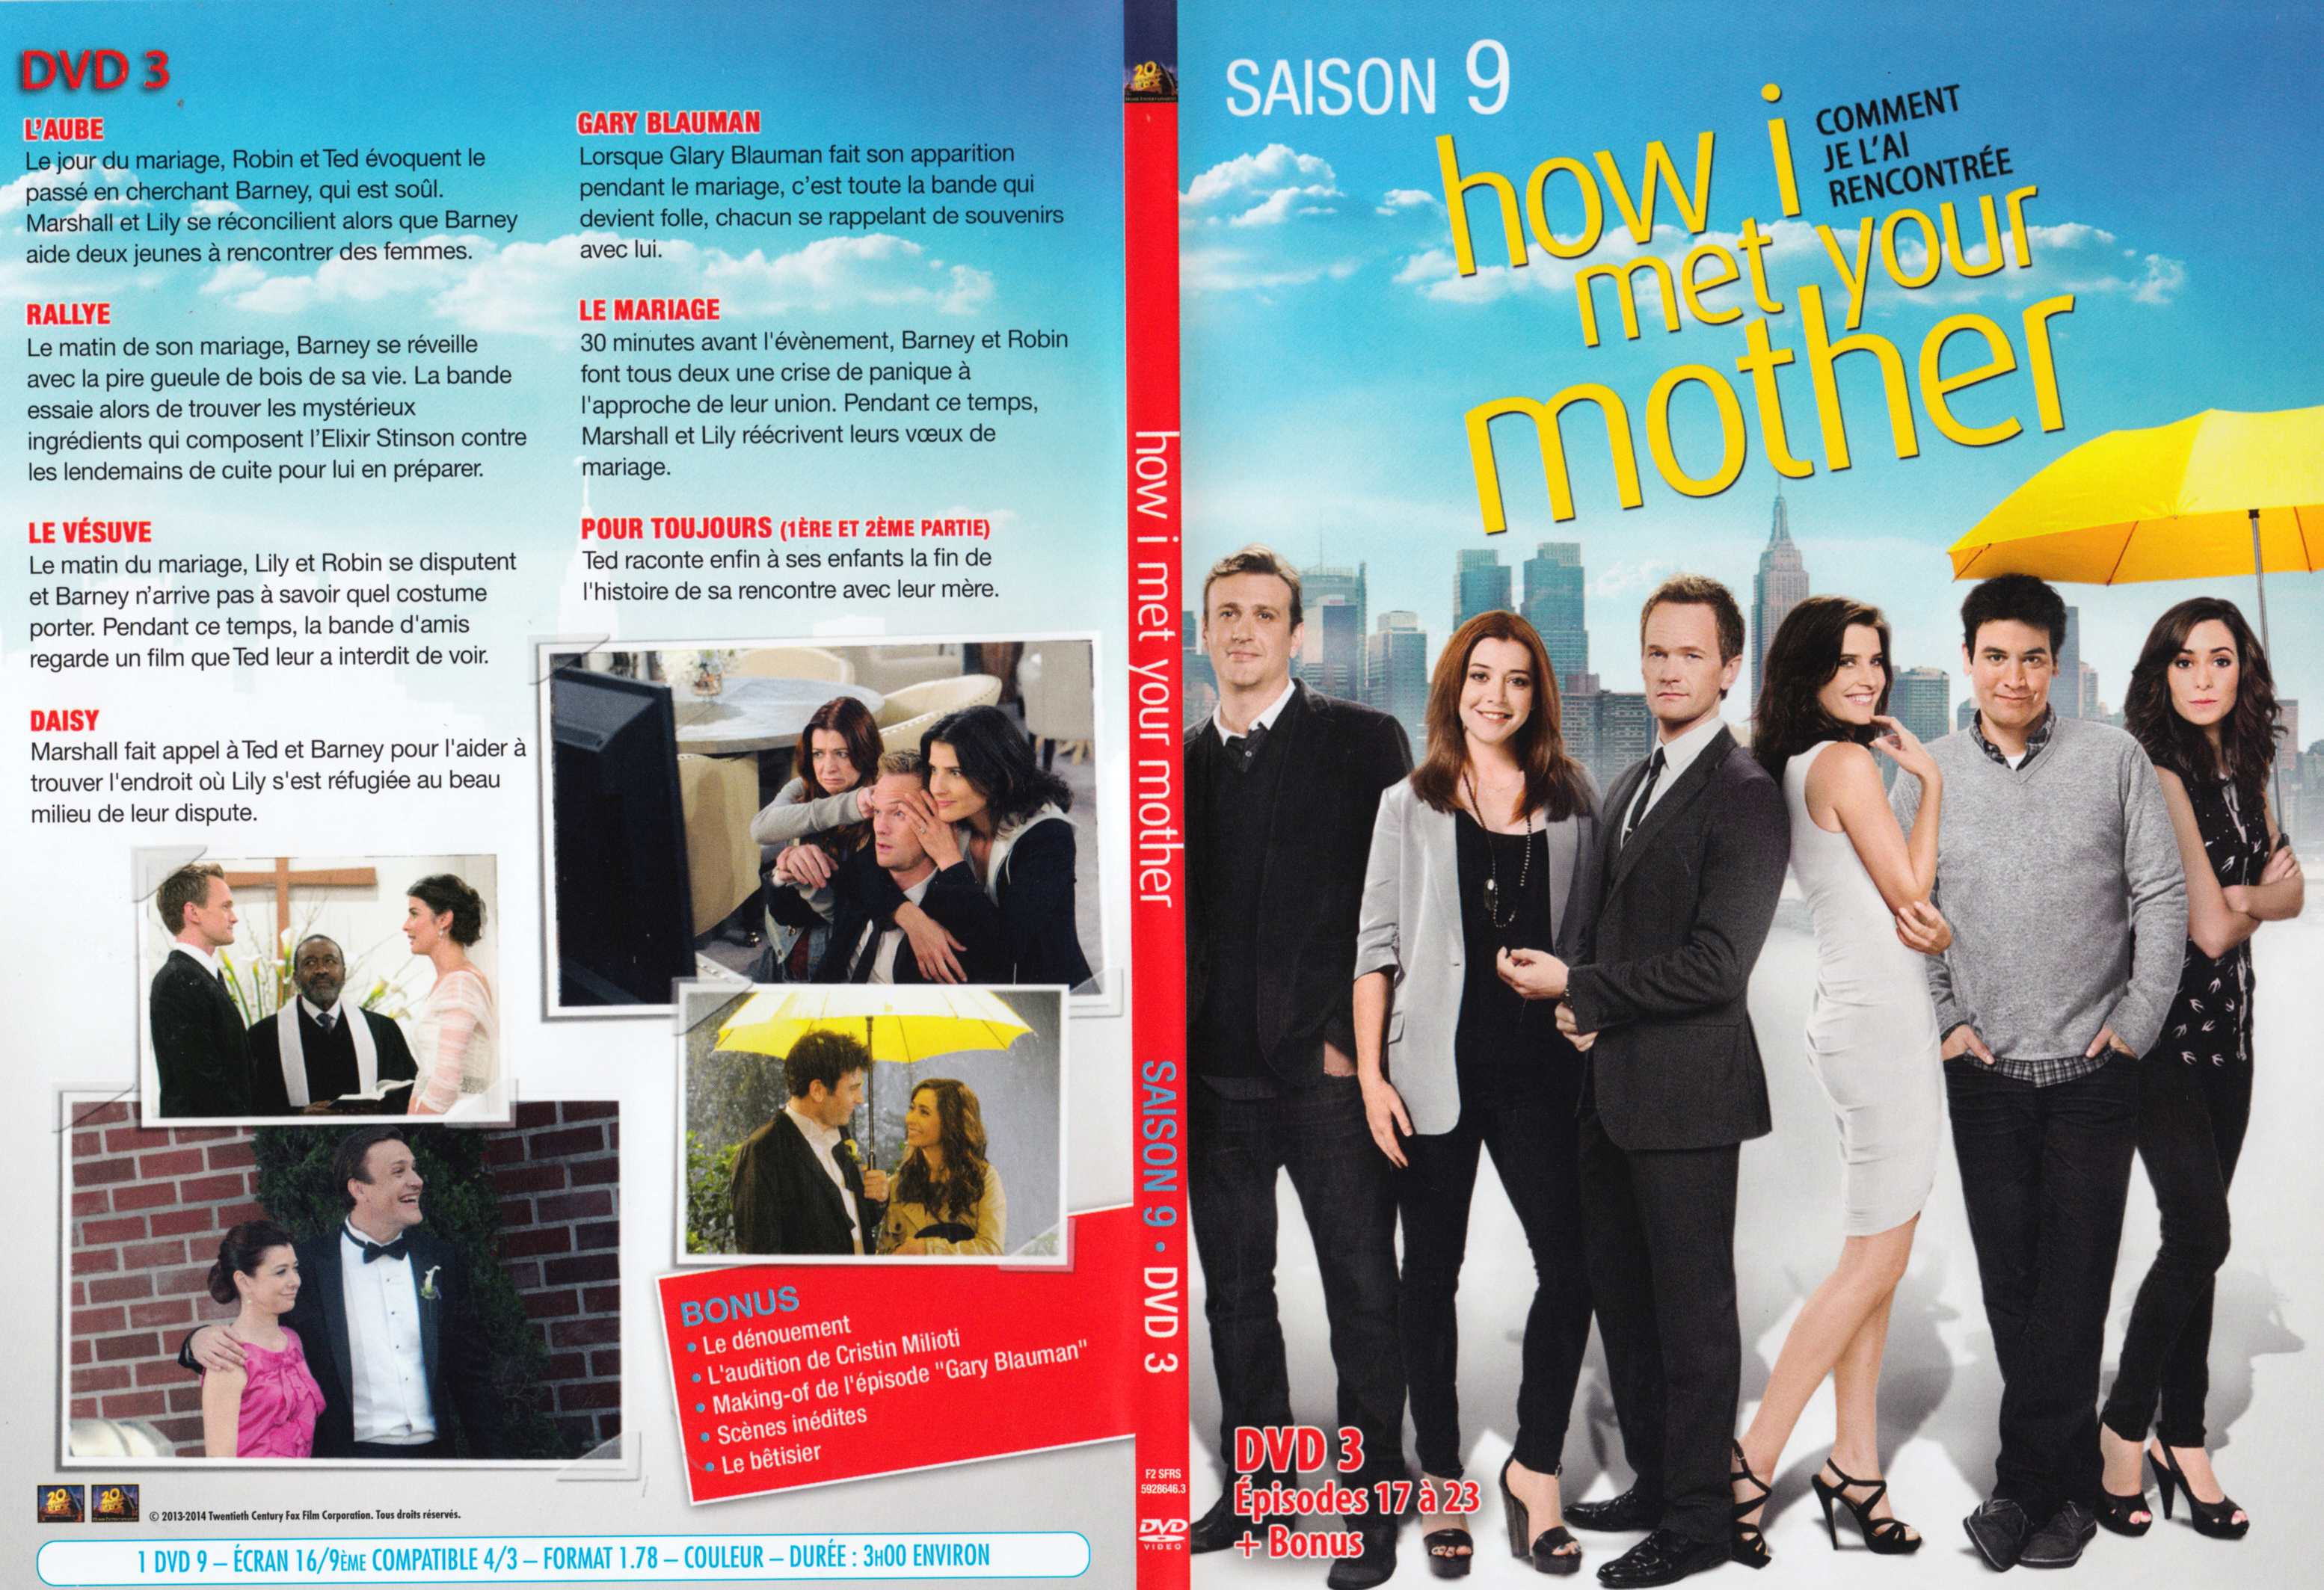 Jaquette DVD How i met your mother Saison 9 DVD 3